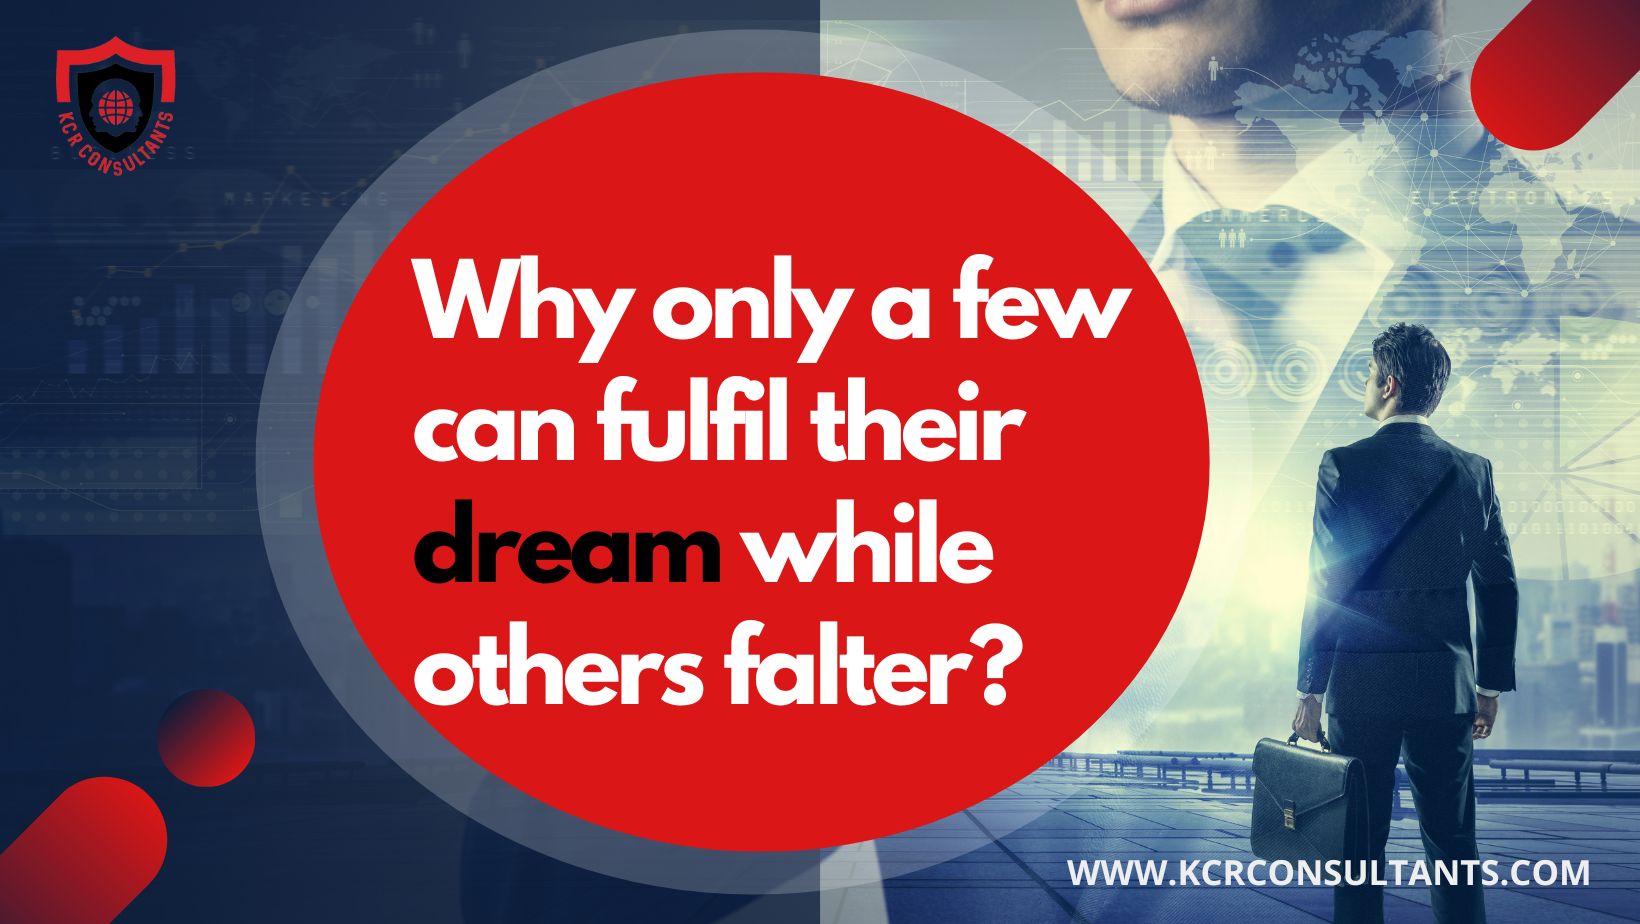  Our beloved legend, Dr A.P.J. Abdul Kalam’s famous quote, says, “You have to dream before your dreams can come true.”  Do you have a dream? Maybe a dream of going abroad?  A dream is not something that we dream of at night.  Yet another famous quote by Dr A.P.J. Abdul Kalam was, “Dream is not that which you see while sleeping, it is something that does not let you sleep.”  Search within your soul and mind what is that one thing about you that you enjoy doing for hours but don’t get tired or bored.  One of the sarcastic answers that students reply is “sleeping”. That isn’t going to work, my friend. You should be more serious about it and give it a thought.  You are the society of tomorrow. Your decision today will determine your future.   The 5% group  I have come across many students who used to say they want to become a pilot, vets, doctors, an engineer, astronauts, police, navy, physician, architect, sailors, professors, and more. But less than 5% of them only pursue their childhood dream. What happens to the remaining 95%? They finish schooling, get into college, earn a degree, get an IT job, work five days a week, get married, have a family, bring up the kids, kids’ marriages, and old age.  Why only a few can fulfil their dream while others falter? They didn’t set their goals right and settled for the normal, not the extraordinary. The few people who pursued had that dream inside and outside, keeping them burning until they reached that goal. Do you have a dream?  Does your dream (dream of going abroad) have many barriers and limitations? Congrats on taking the first step of having a dream, as quoted by Dr Abdul Kalam. The barriers might be parents’ compulsion or refusal, relatives’ pressure, financial problem, distance, and huge responsibilities. Didn’t the 5% have all of this? Then how come they succeeded? Life is all about balancing and efficiently spending your valuable time.  Do not think or feel that studying abroad is only for the rich with loads of money.   That is a wrong misconception! Anyone can study abroad if they have the required talent and desire. I have good news for you if you dream of going abroad for studies or work.  It is possible! Your dream of going abroad can come true with proper guidance and support. Study in Germany for free  There are so many programs in Germany that offer courses to international students.  It would be best to learn German (till B1 level) to become eligible for those programs.  Have you passed your 12th exam under the CBSE or State Board Curriculum with a minimum average of 50%?  Great! You are qualified to apply for various programs from world-class universities in Germany.  If you want to know why I spoke about Germany, kindly read the article Why choose Germany to study abroad.  Please read Which country is one of the best to provide world-class education to know more about different countries and their educational quality.  You can read How to study in Germany for free to have a clearer notion about free education in Germany. Let KCR CONSULTANTS know about your dream of going abroad and your desire. Talk to our counsellors about all your interests and barriers. They will develop the best solutions to pursue the course based on your interests. Contact them now!